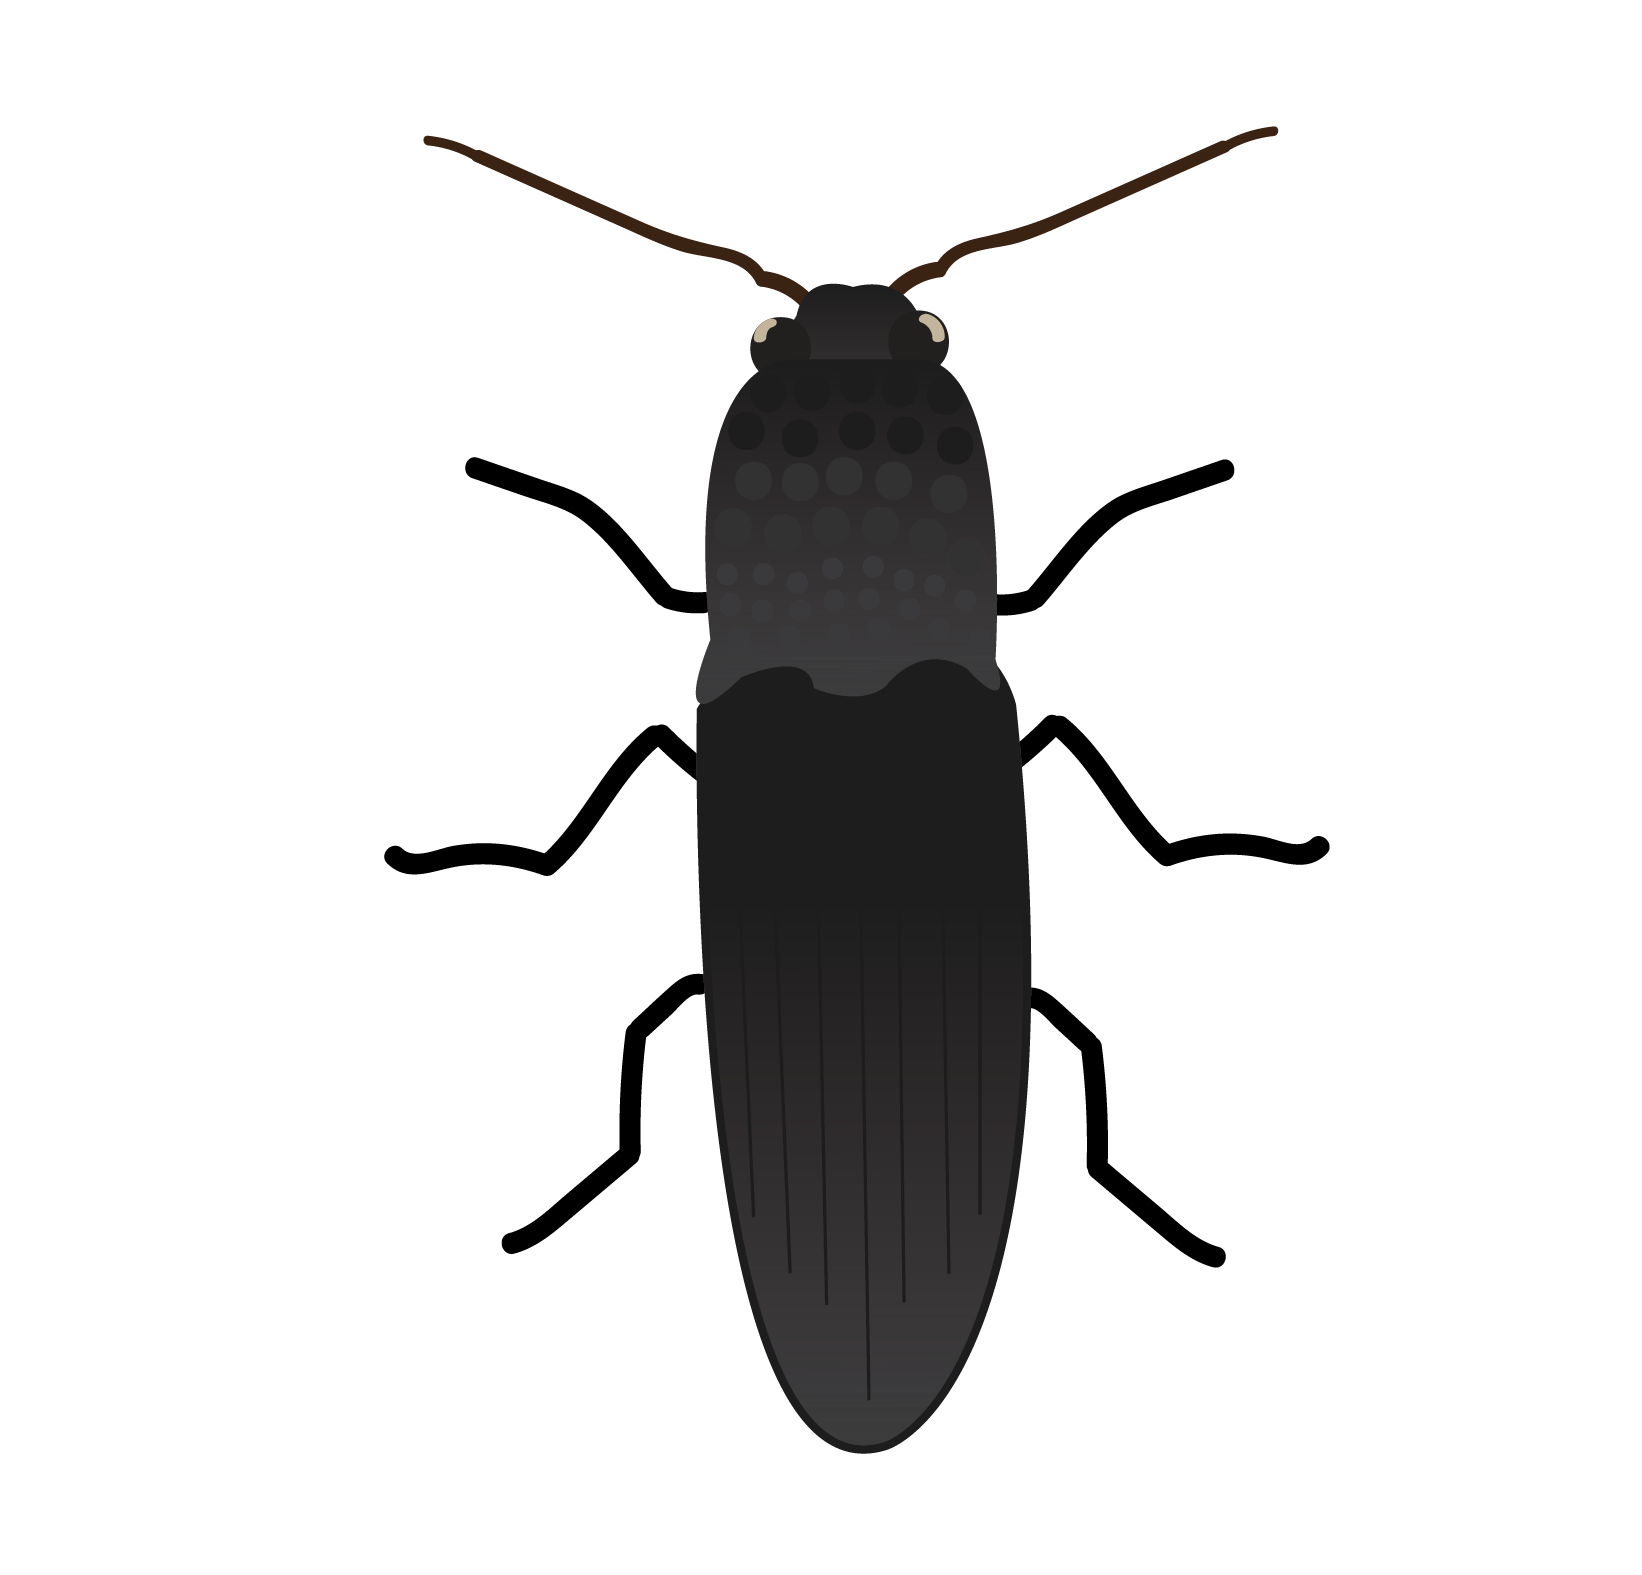 Click Beetle (wireworms) | BioLogic Company